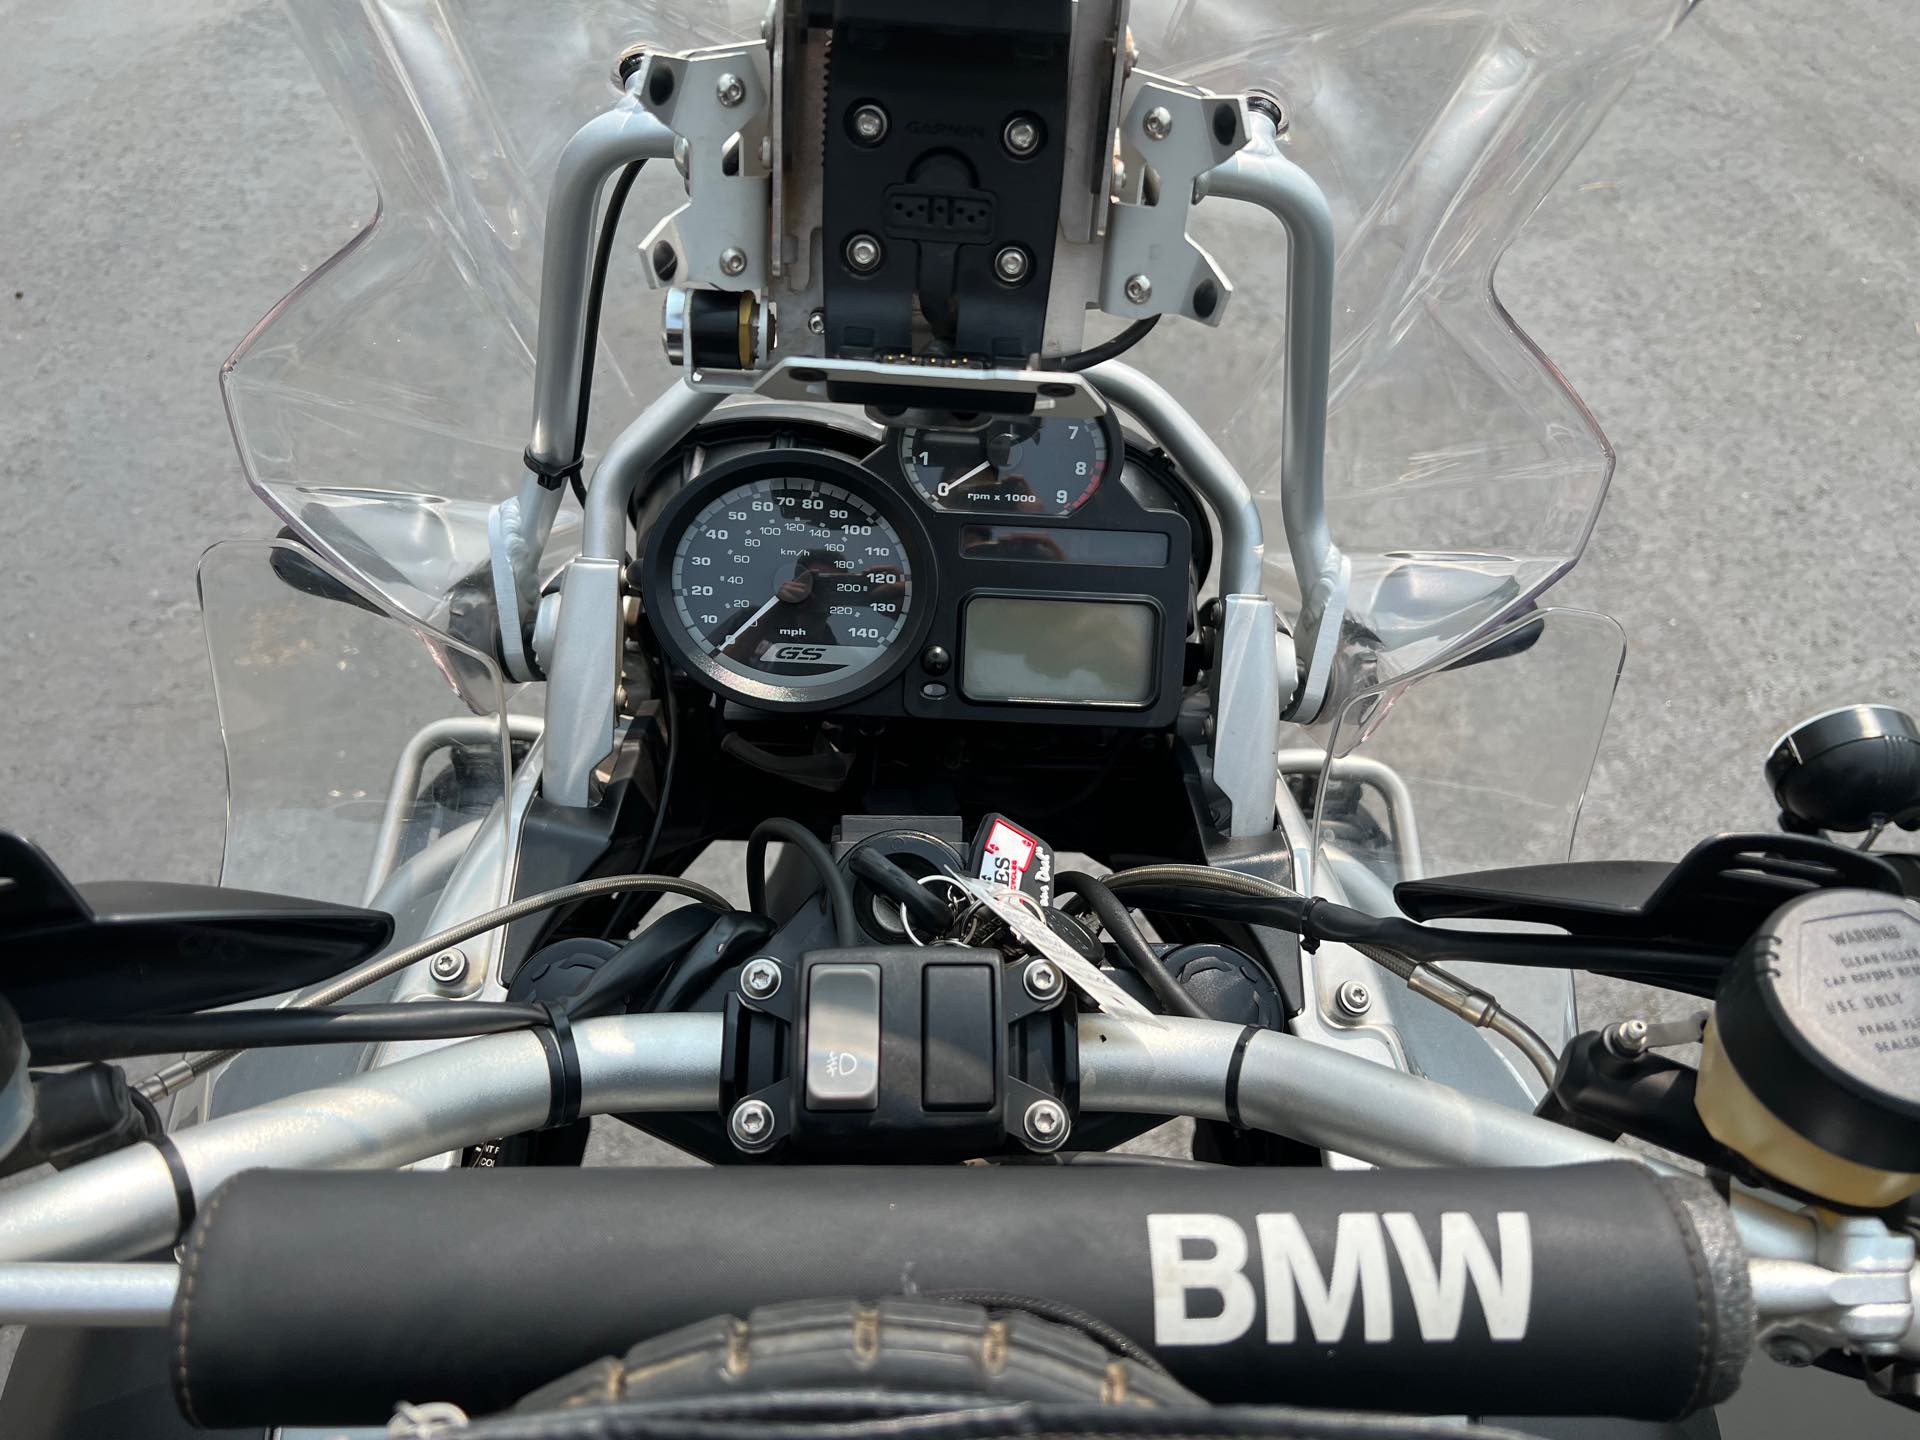 2007 BMW R 1200 GS Adventure at Aces Motorcycles - Fort Collins